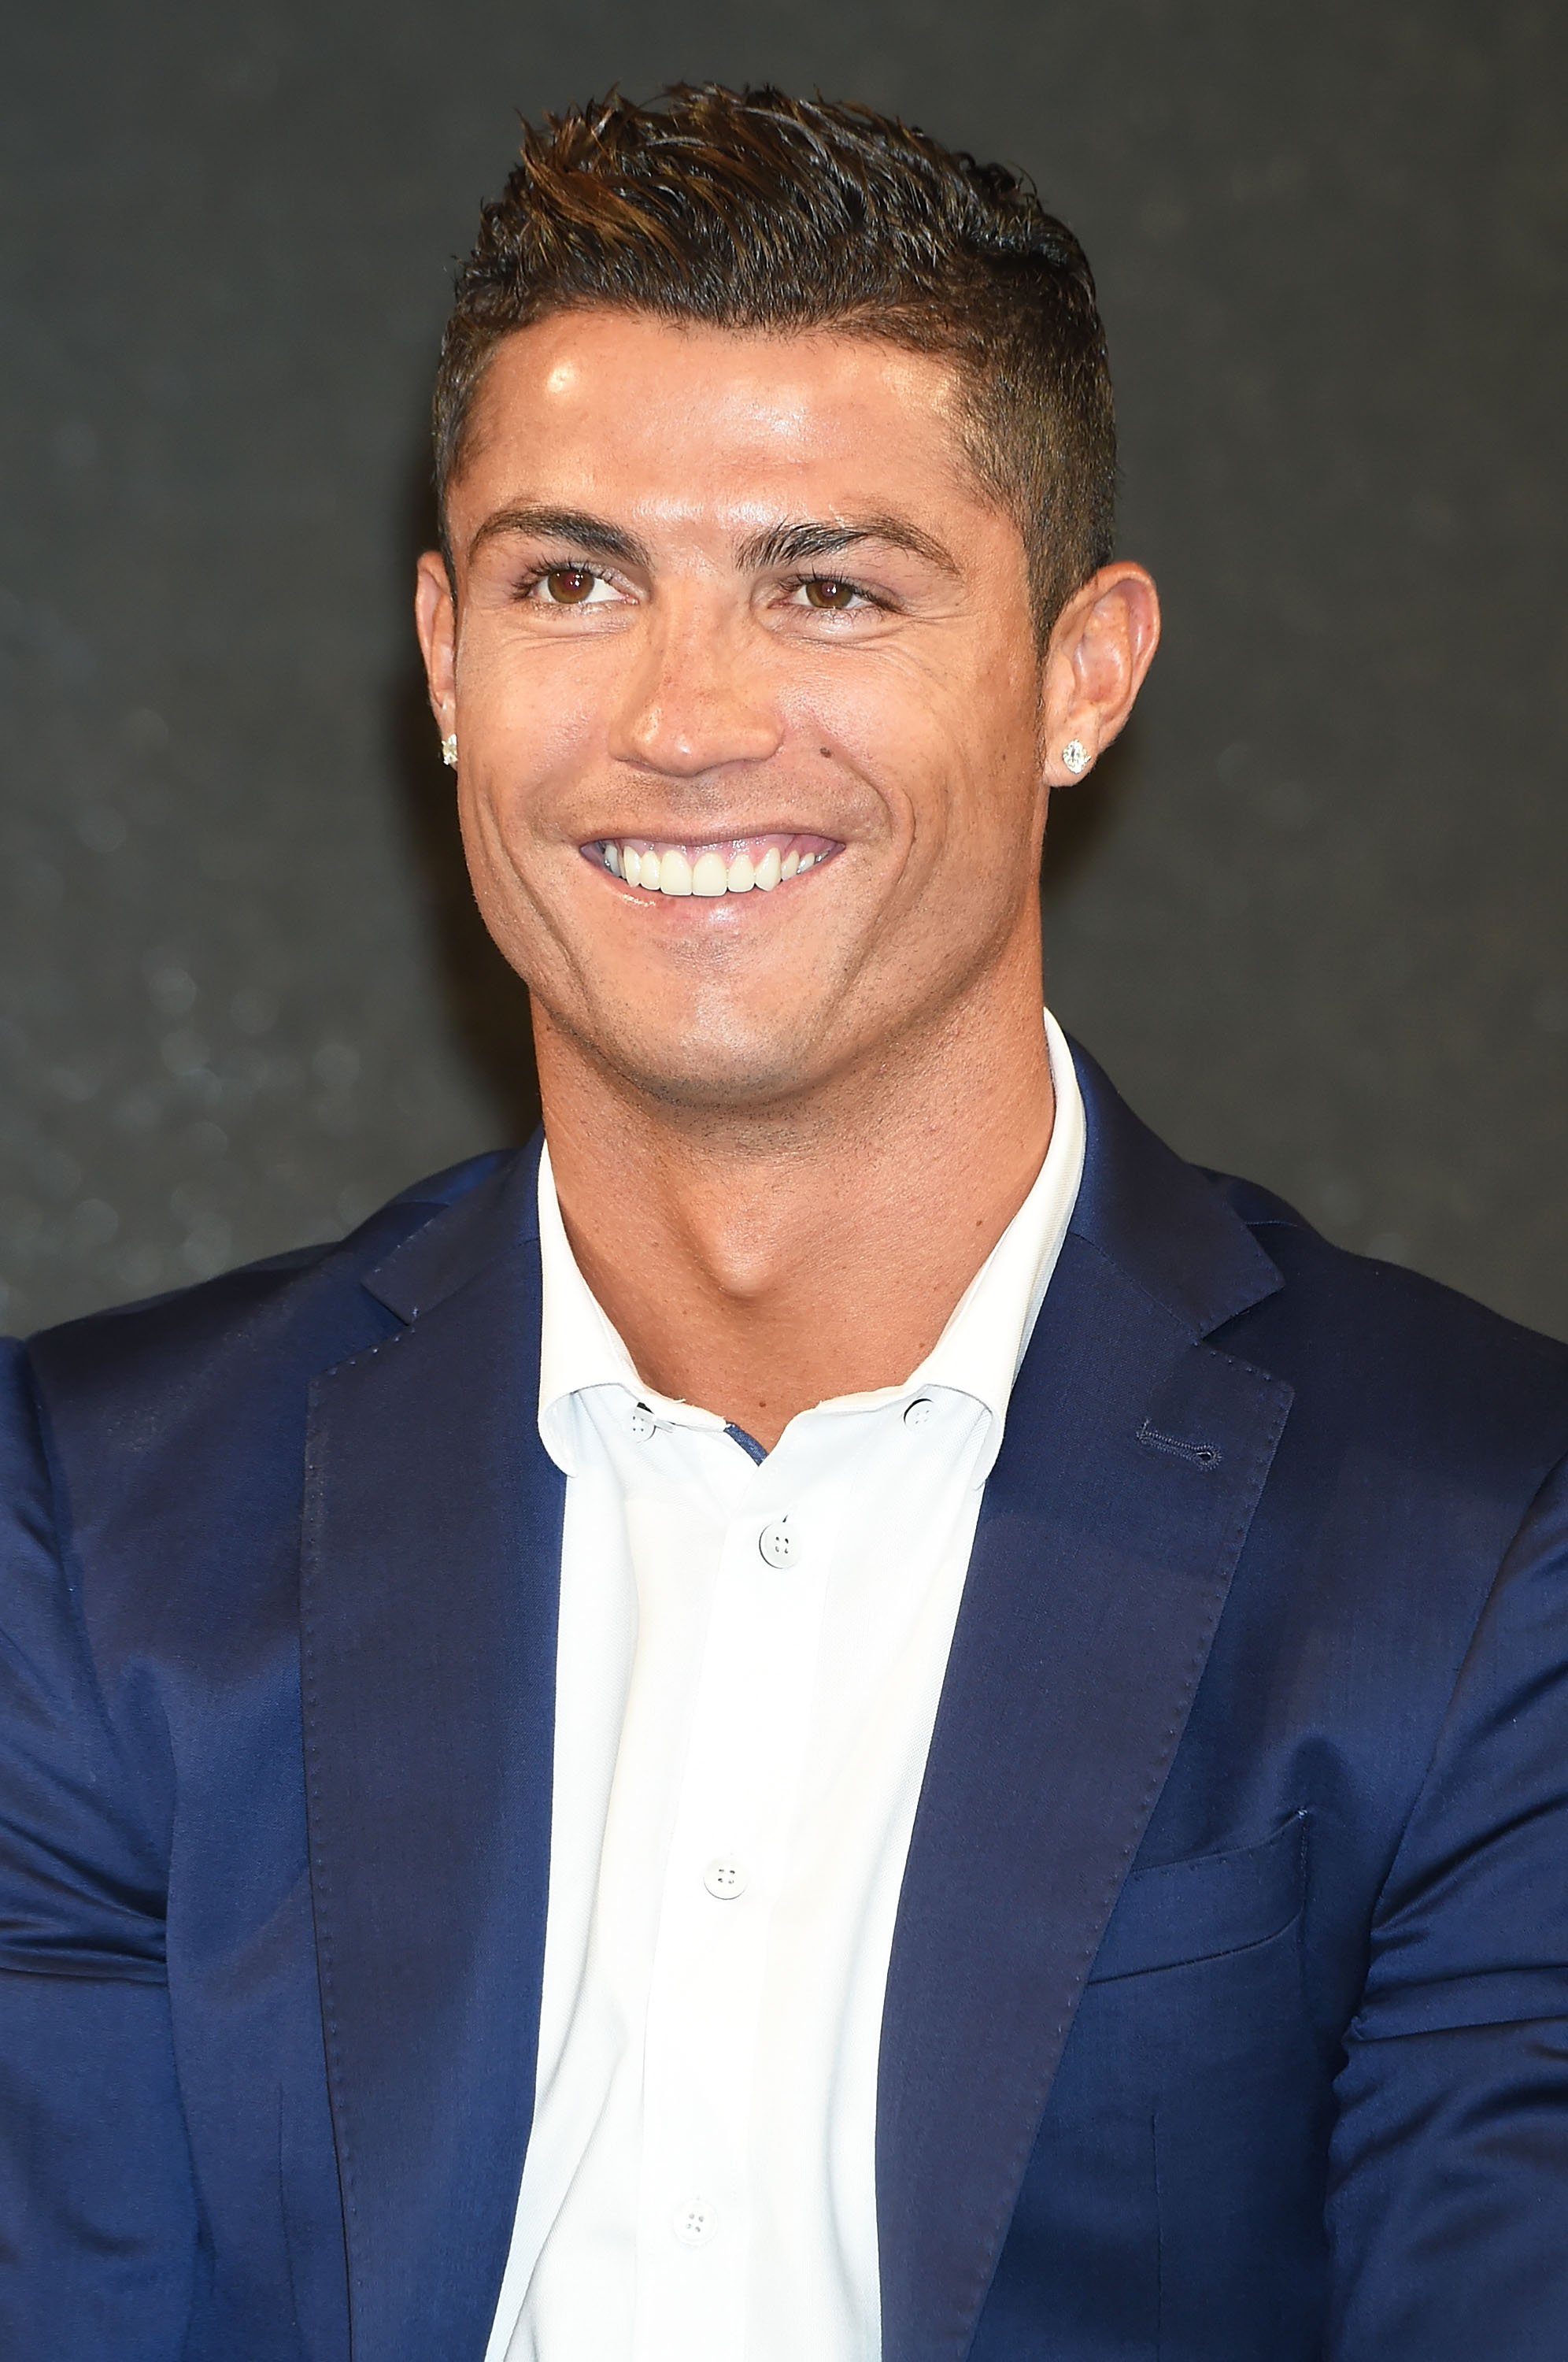 Cristiano Ronaldo during a press conference on July 7, 2015 in Tokyo, Japan. (Jun Sato—Getty Images/WireImage)